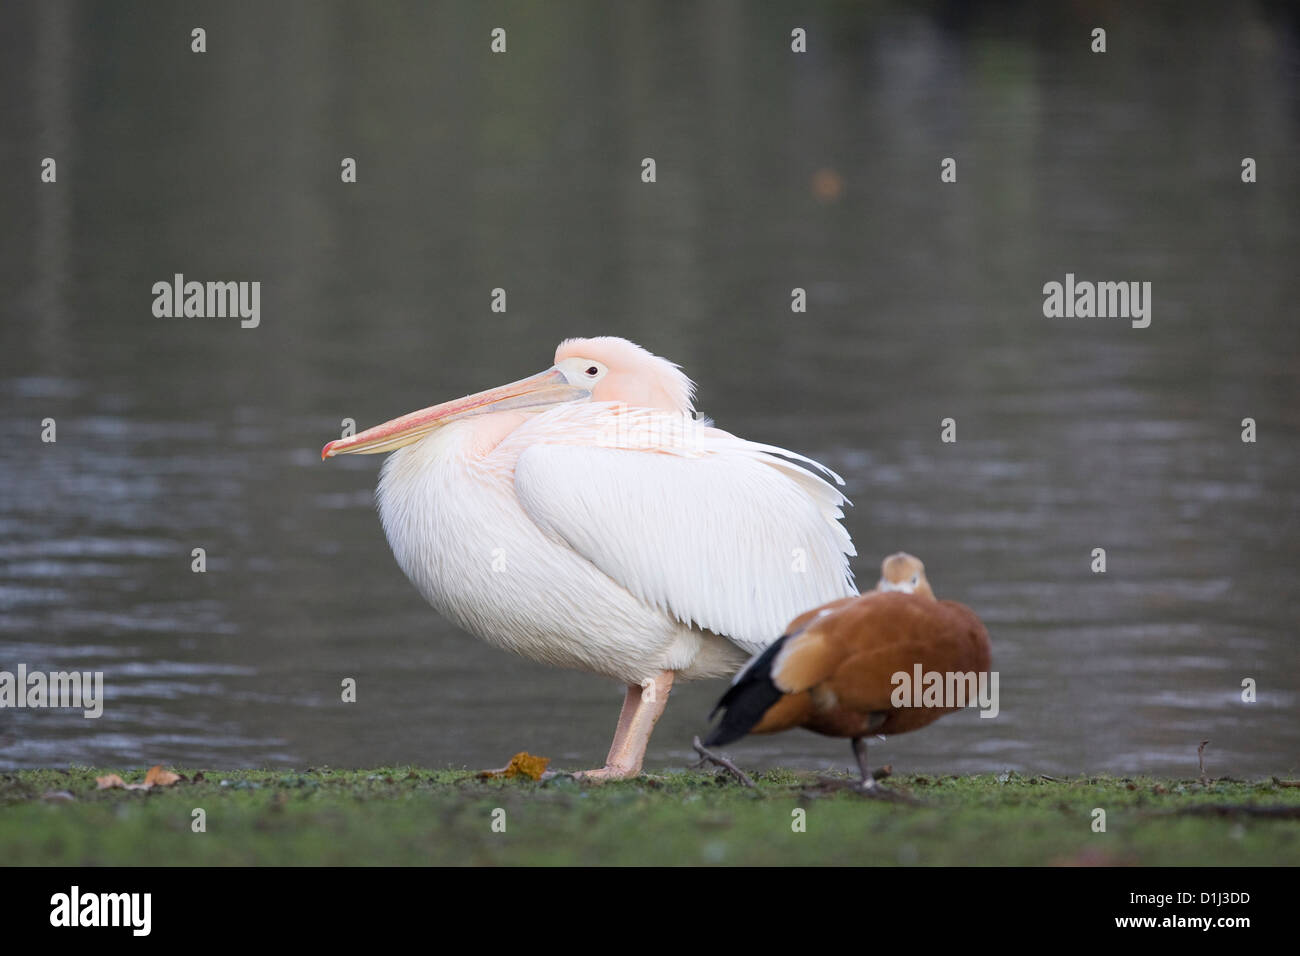 pelicans on the lake in London England American White Pelican Great White Pelican Pelecanus onocrotalus Stock Photo